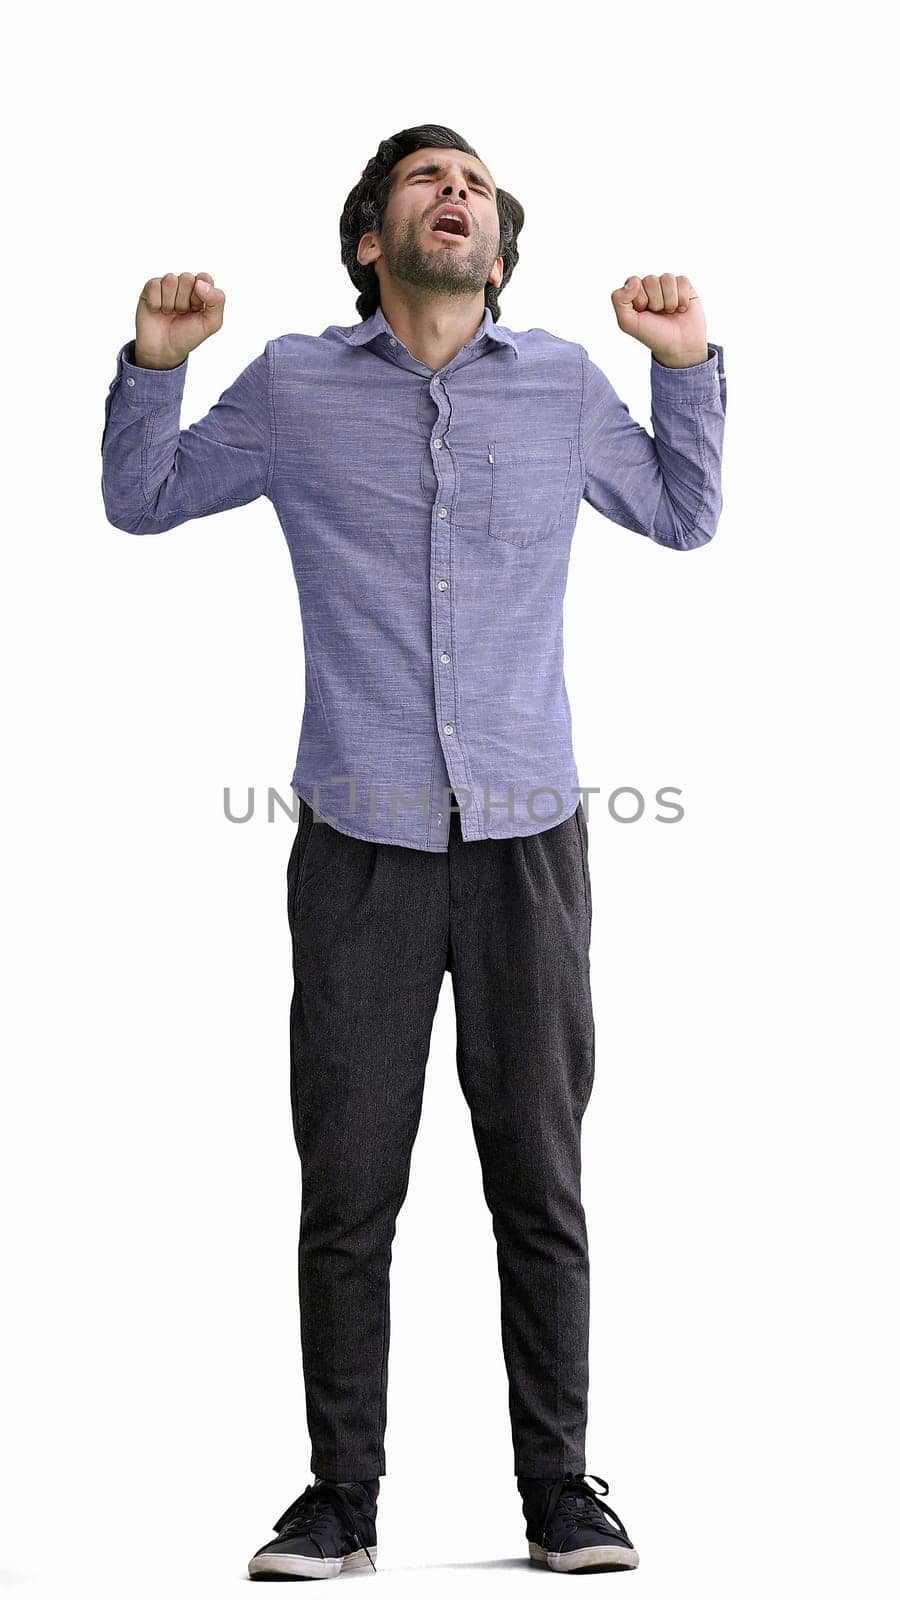 man in full growth. isolated on white background sleepy stretches.